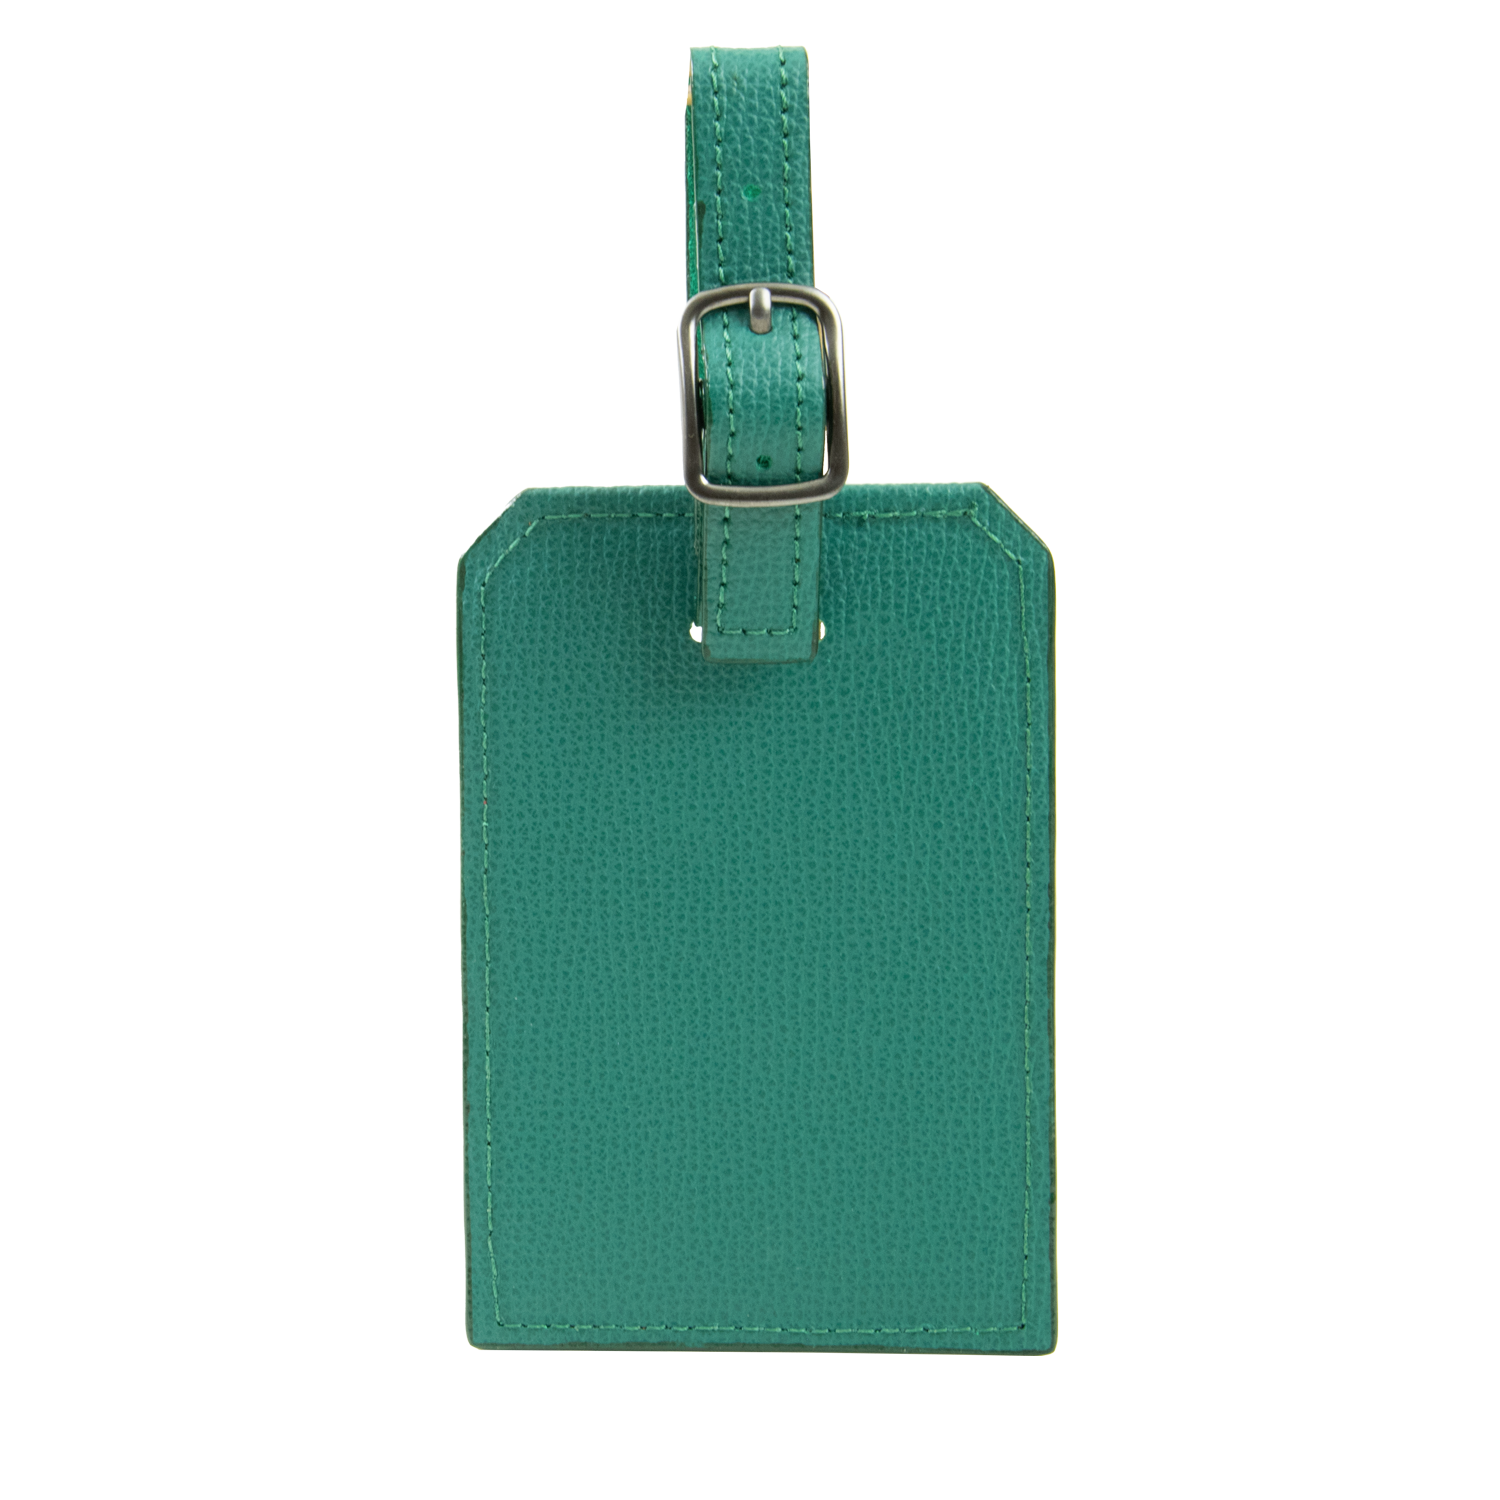 Jahde Leather Liberty Luggage Tag